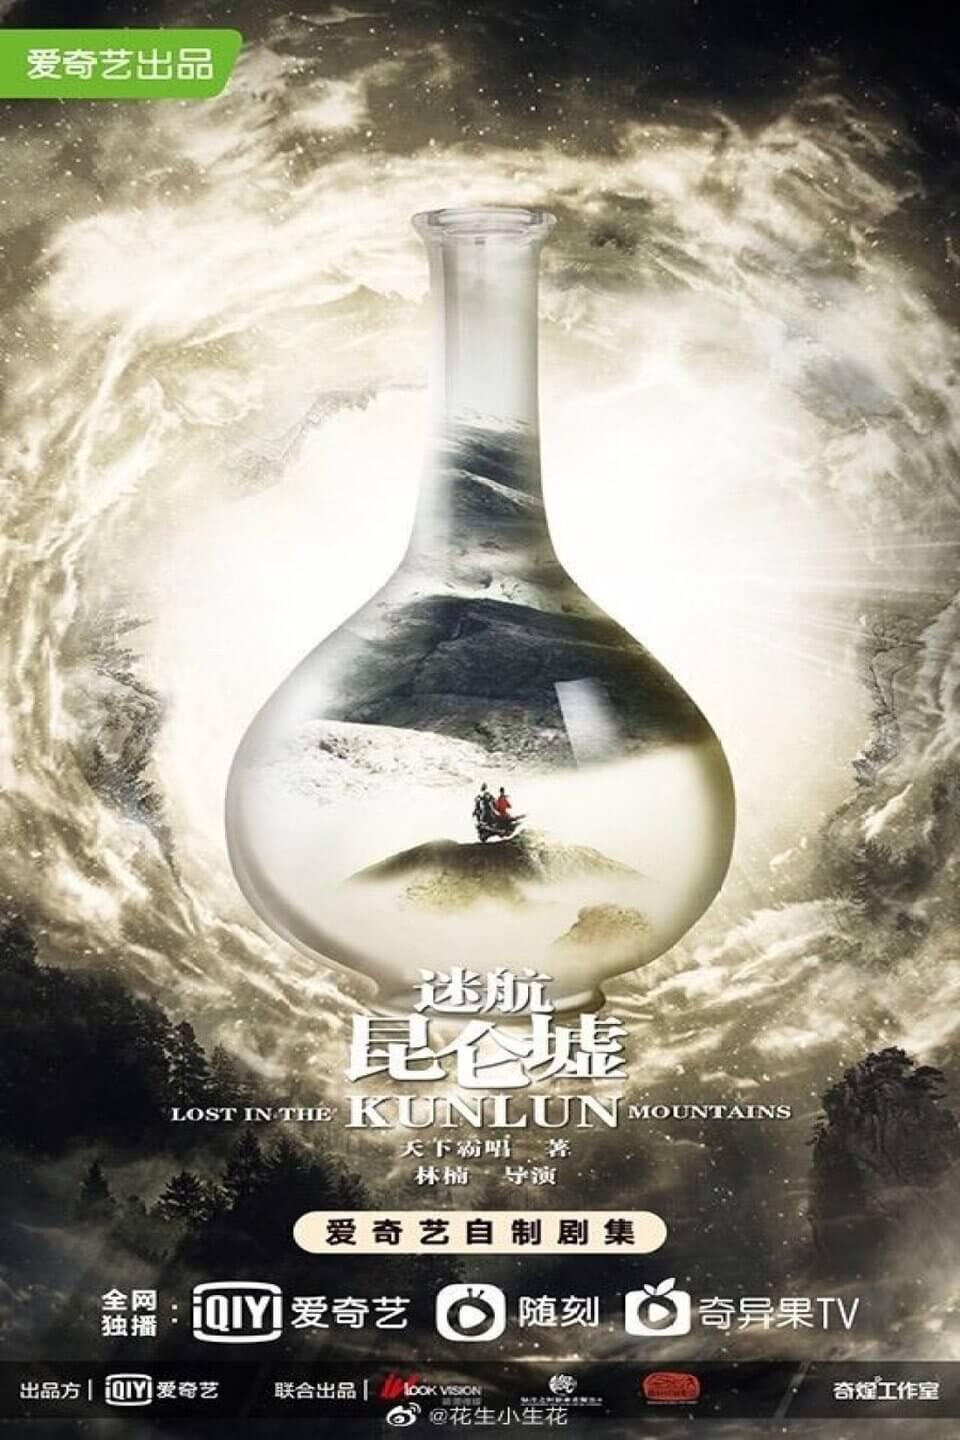 TV ratings for Lost In The Kunlun Mountains (迷航昆仑墟) in the United States. iQiyi TV series